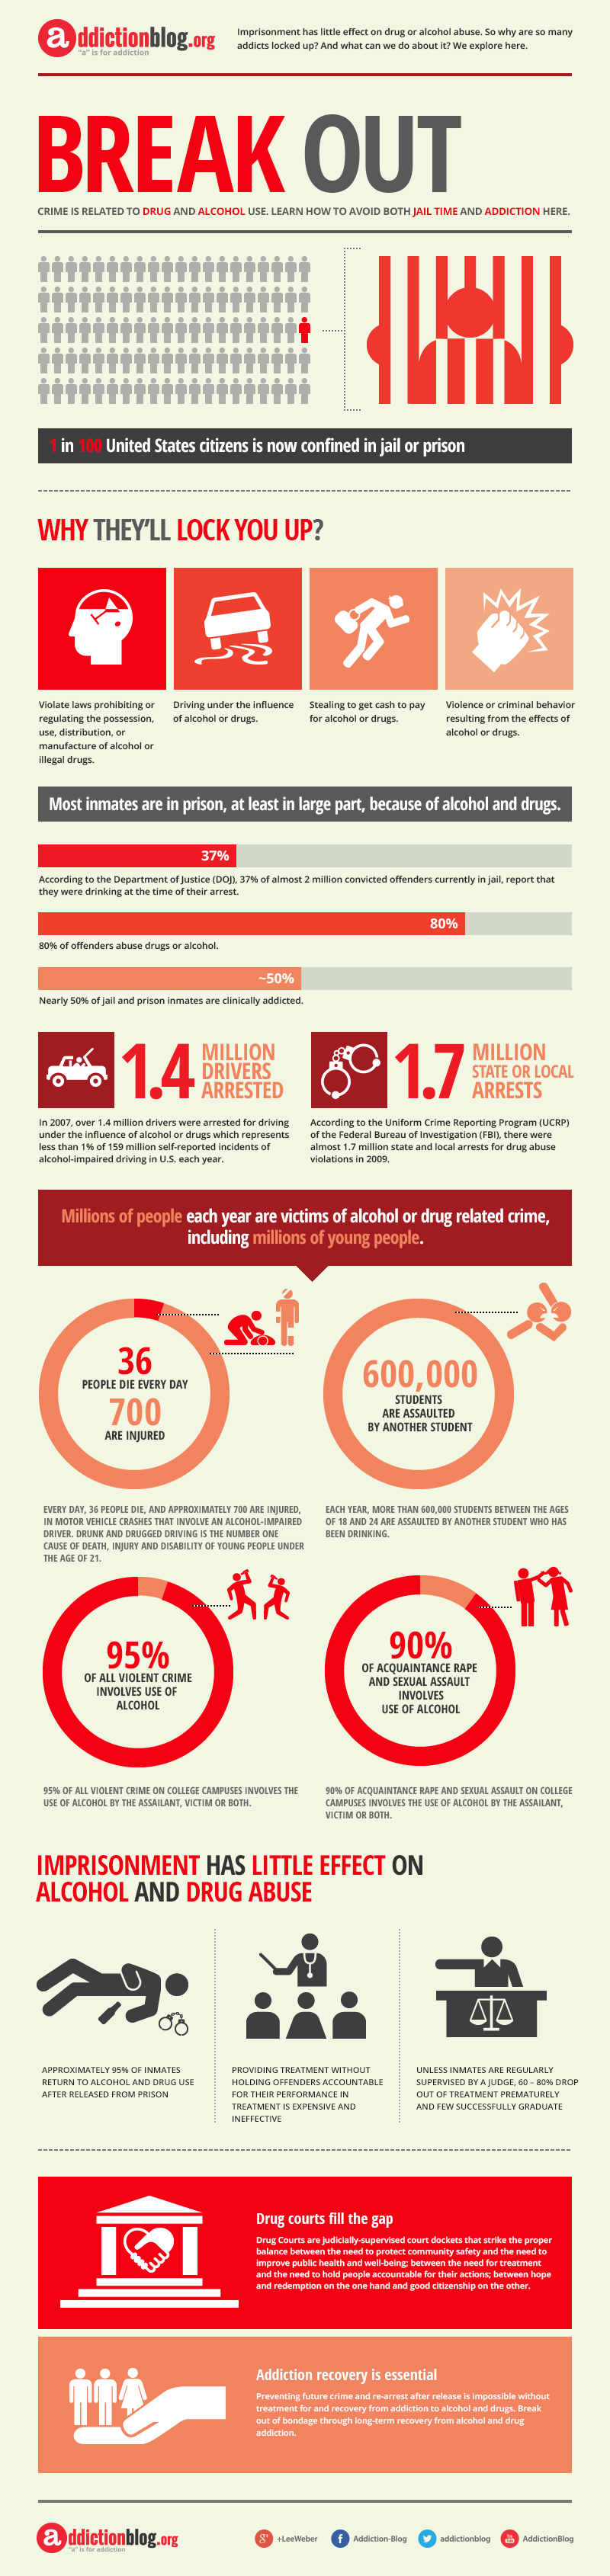 BREAK OUT: Prisons and drug offenders (INFOGRAPHIC)